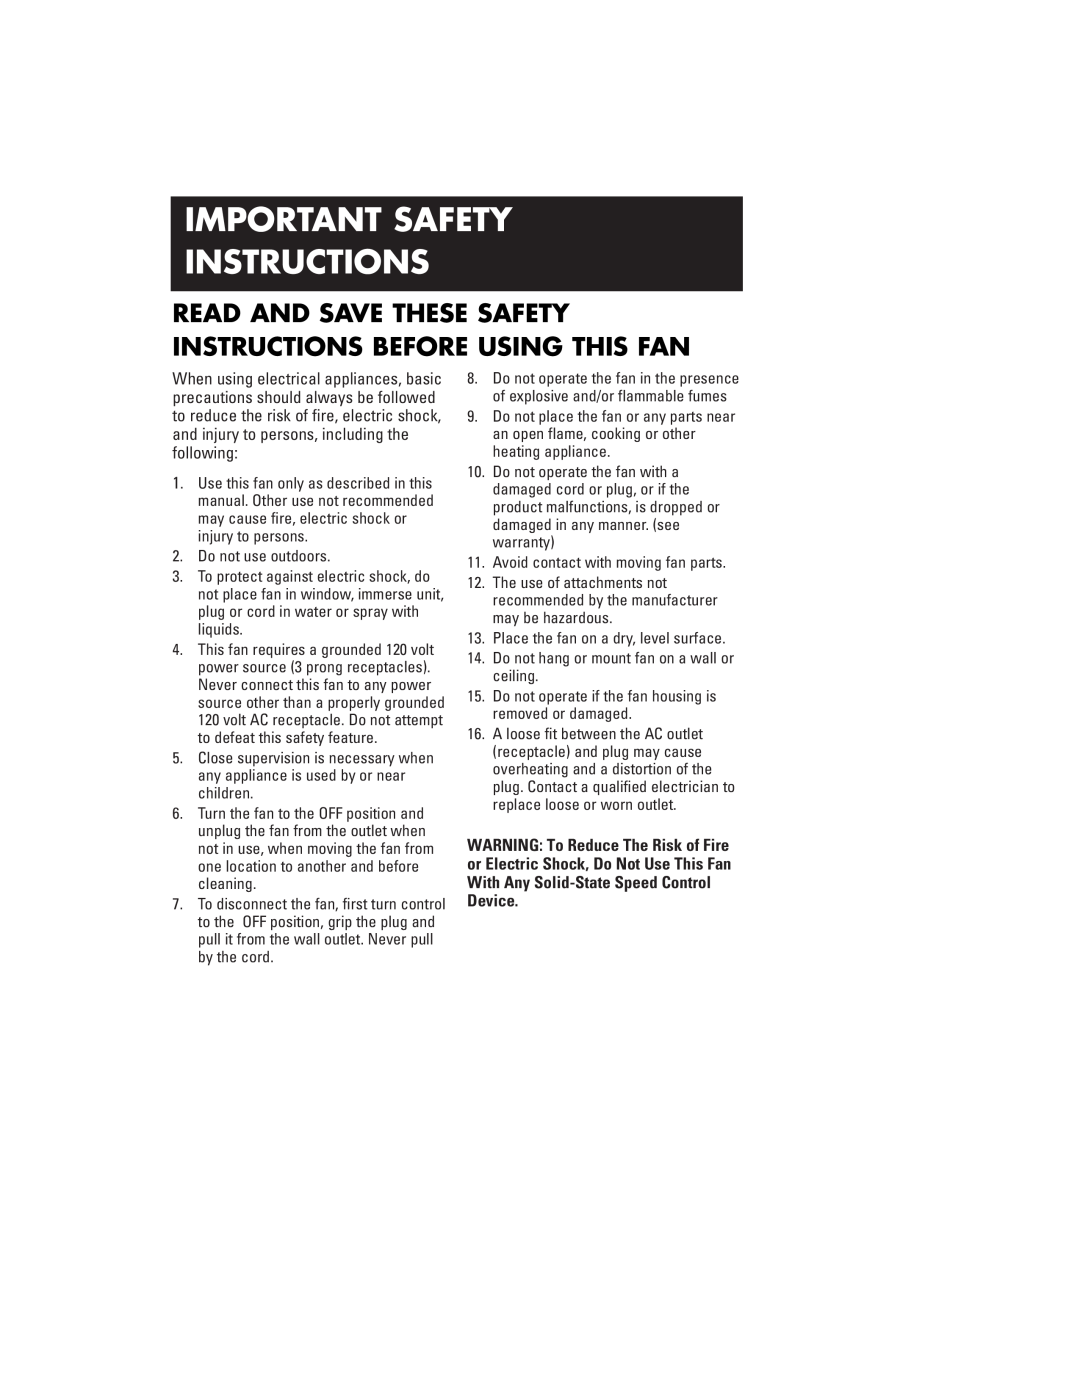 Honeywell HV140, HV180 Important Safety Instructions, Read And Save These Safety Instructions Before Using This Fan 